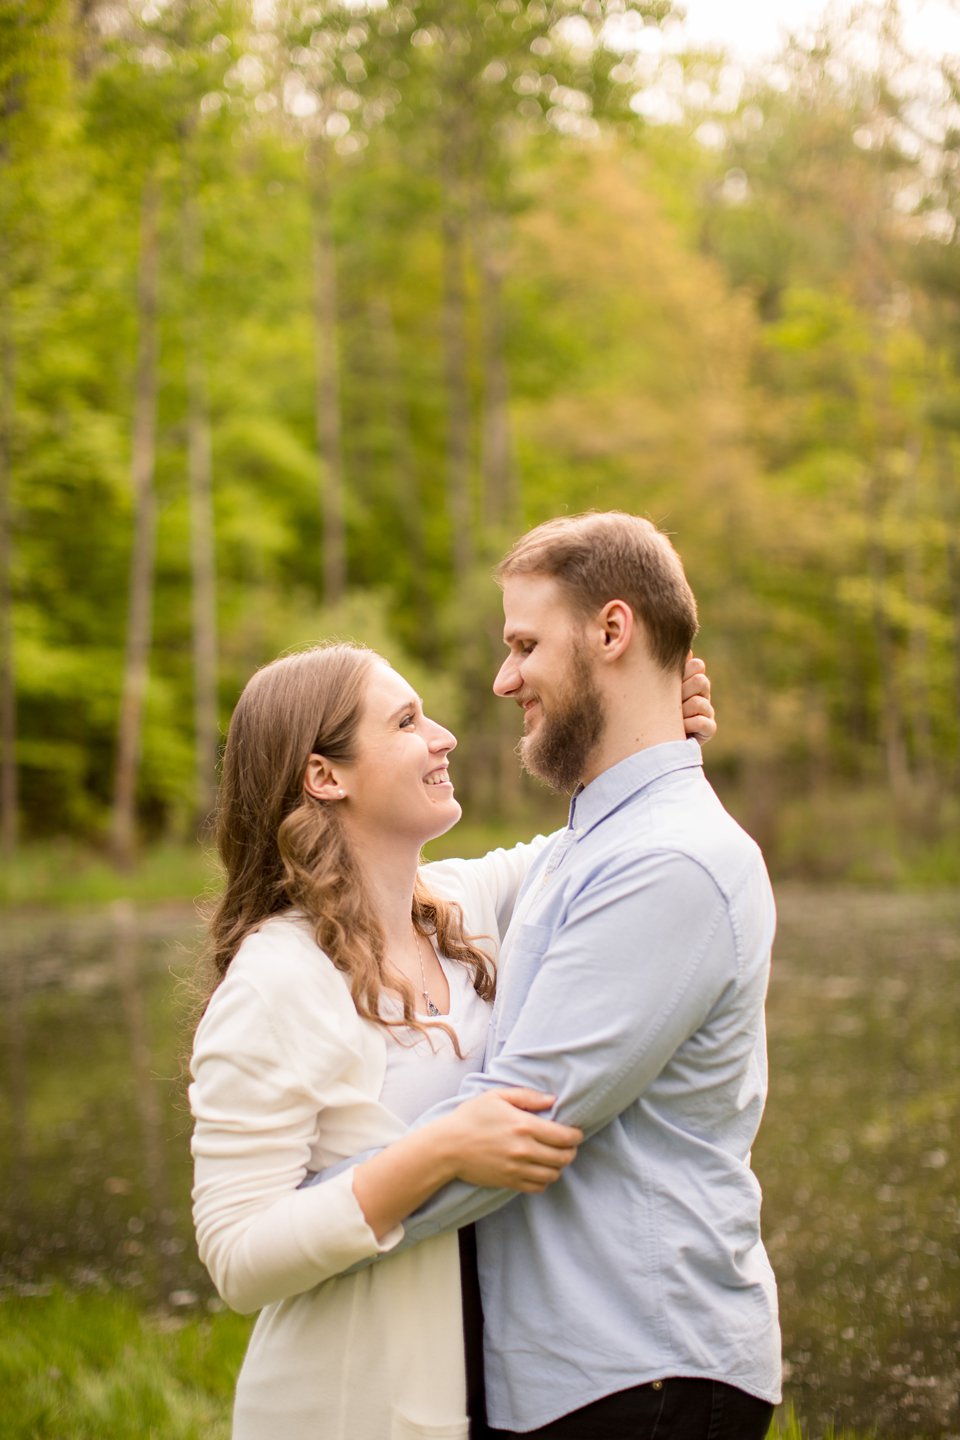 Engagement session photographs at Fitzgerald Park in Grand Ledge, Michigan